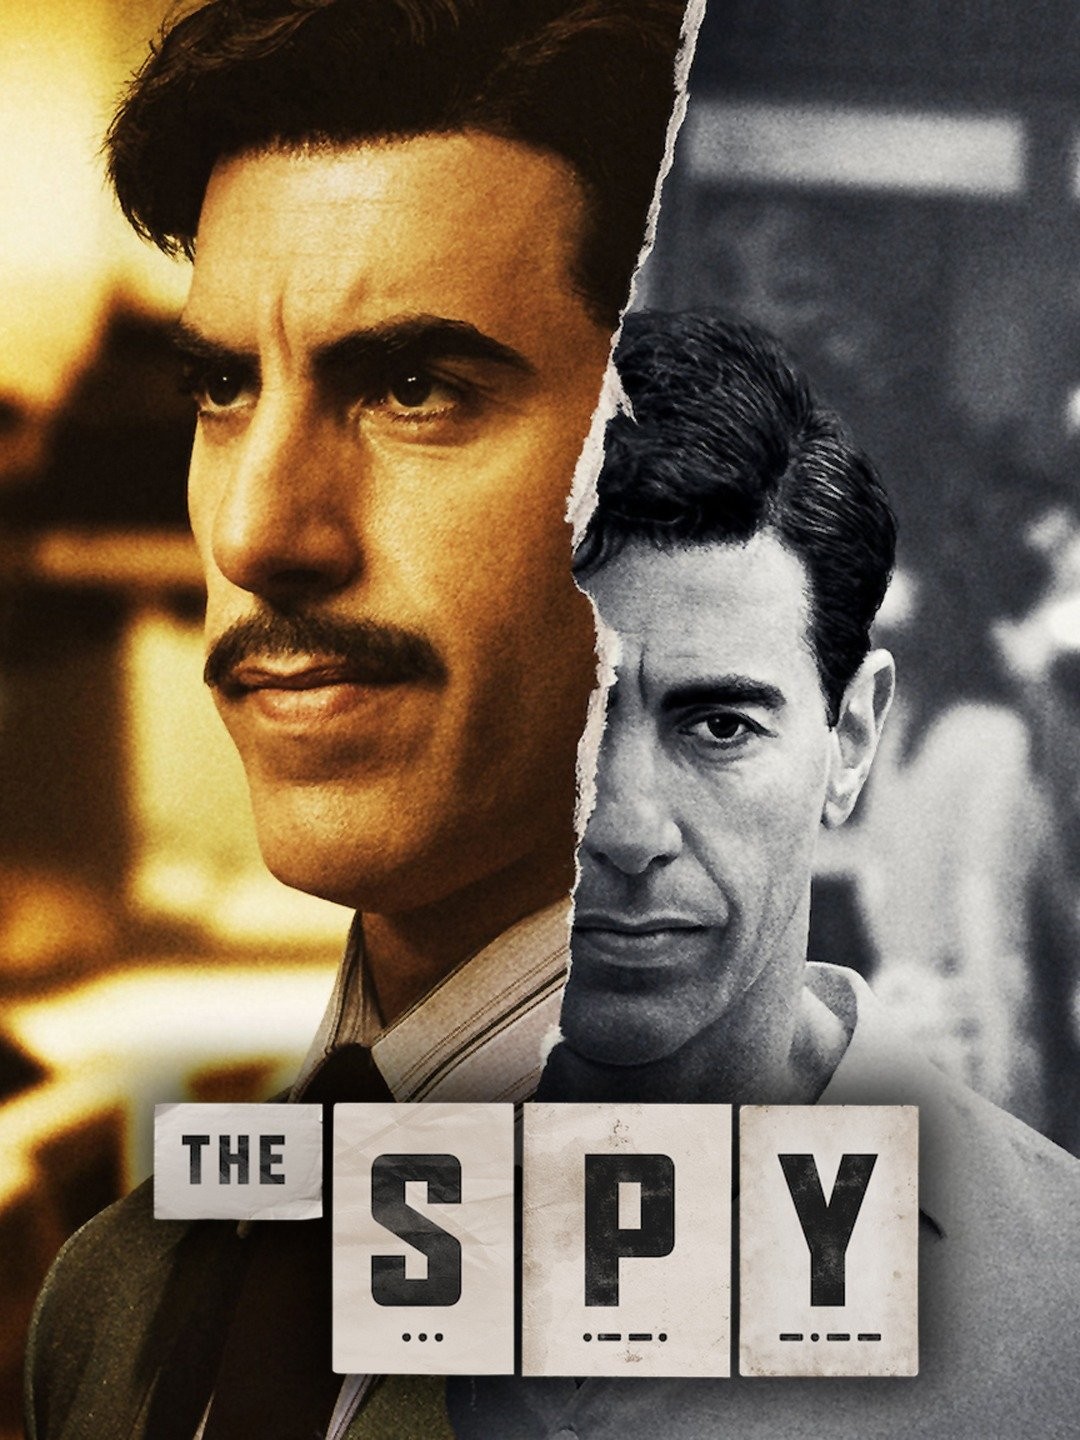 The Spy - Rotten Tomatoes